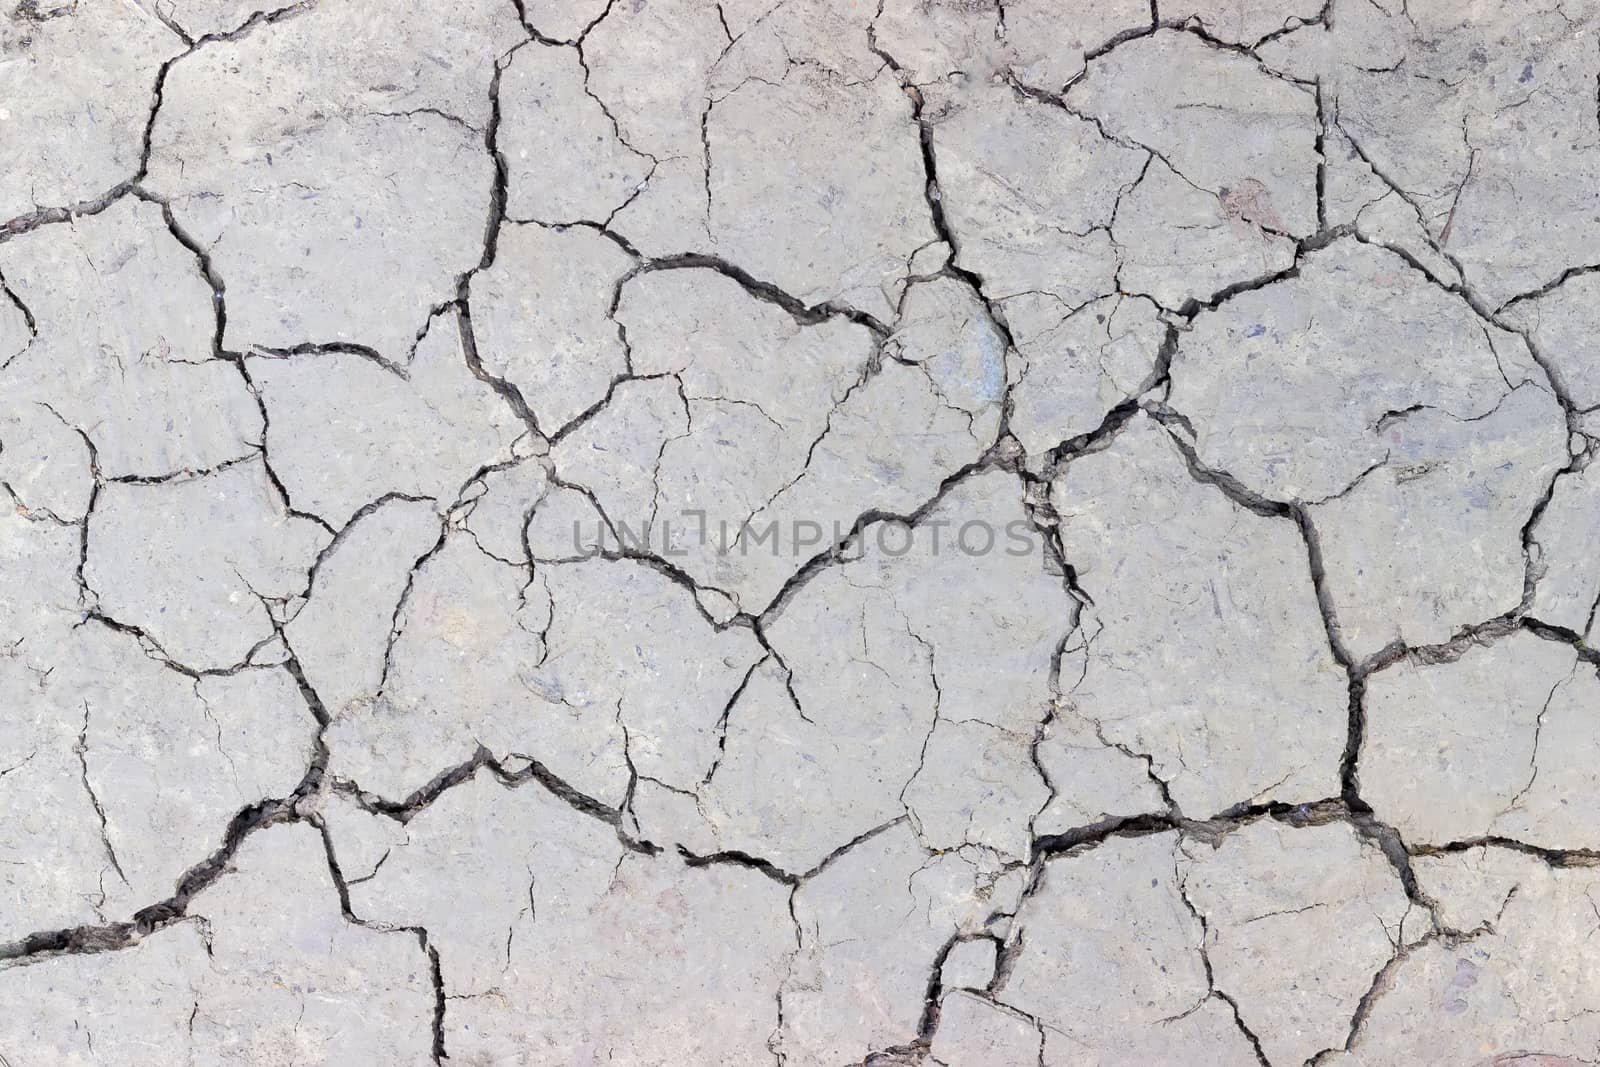 Texture of a fragment of the dirt track with cracks in dried ground during drought closeup
